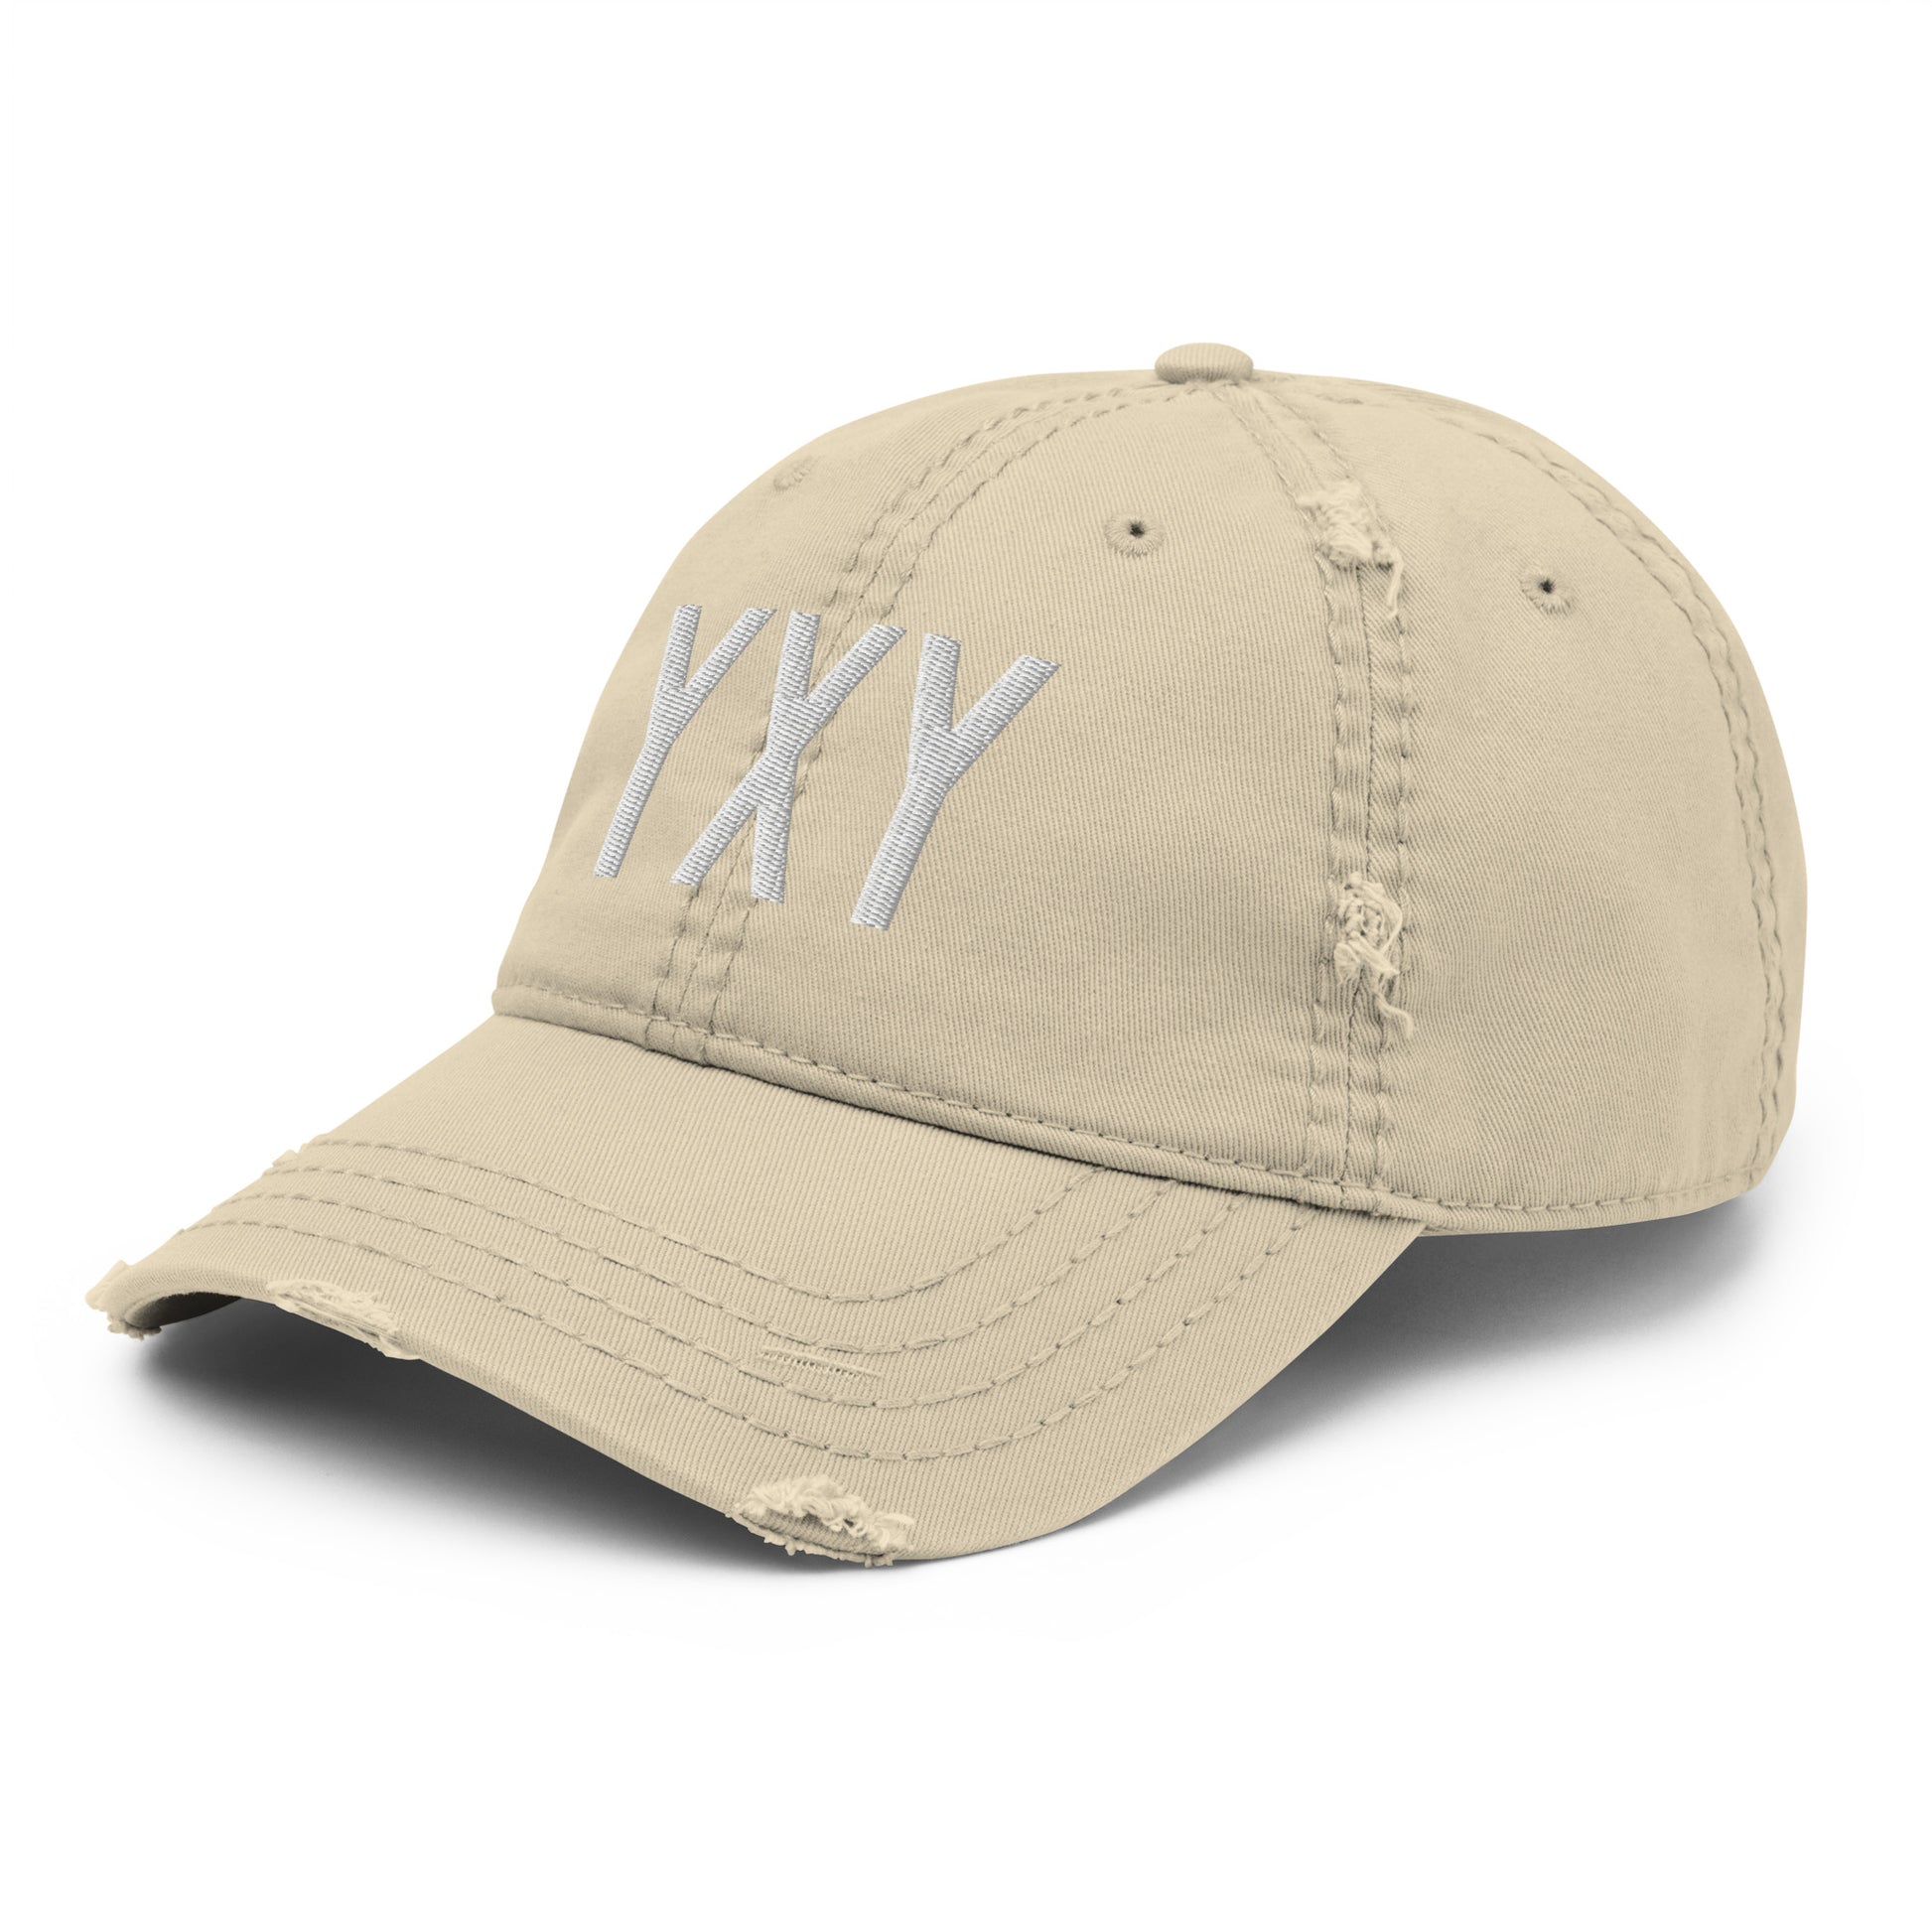 Airport Code Distressed Hat - White • YXY Whitehorse • YHM Designs - Image 19